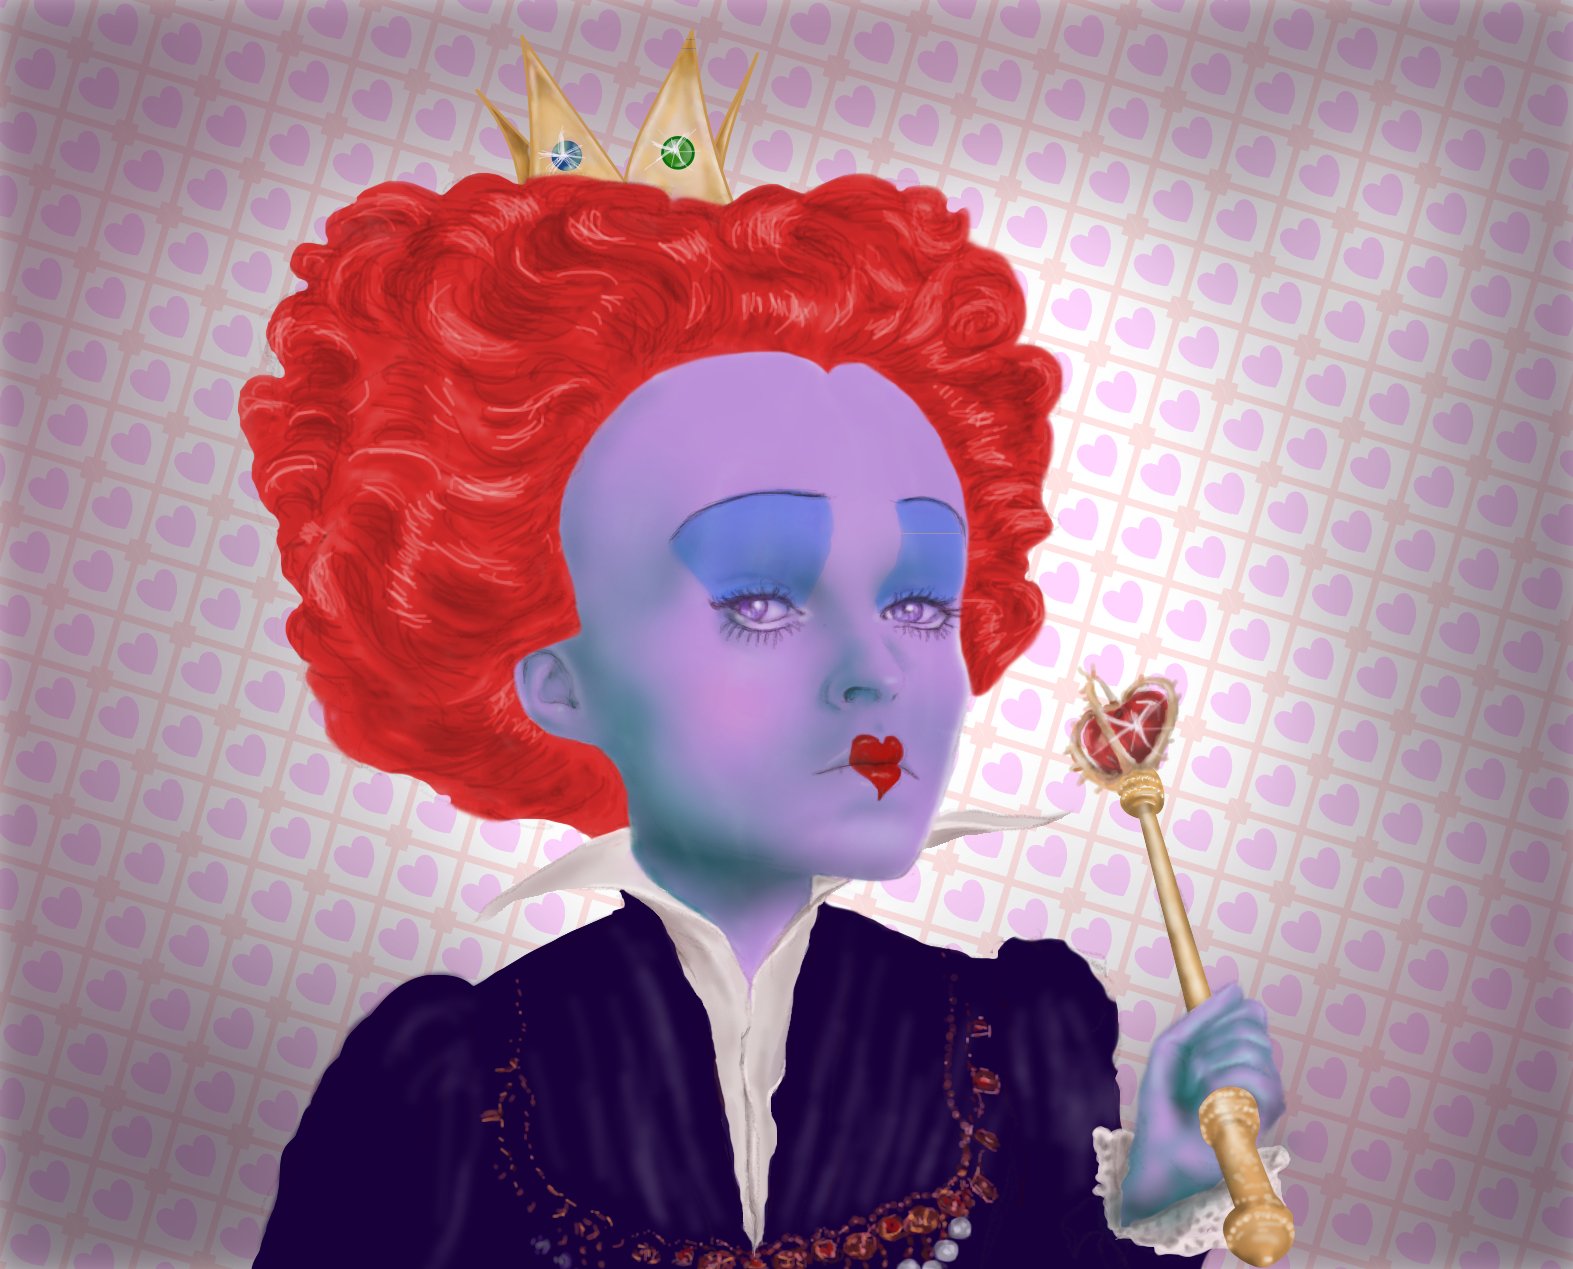 Queen of Hearts drawing using A P - Share your work - Affinity | Forum